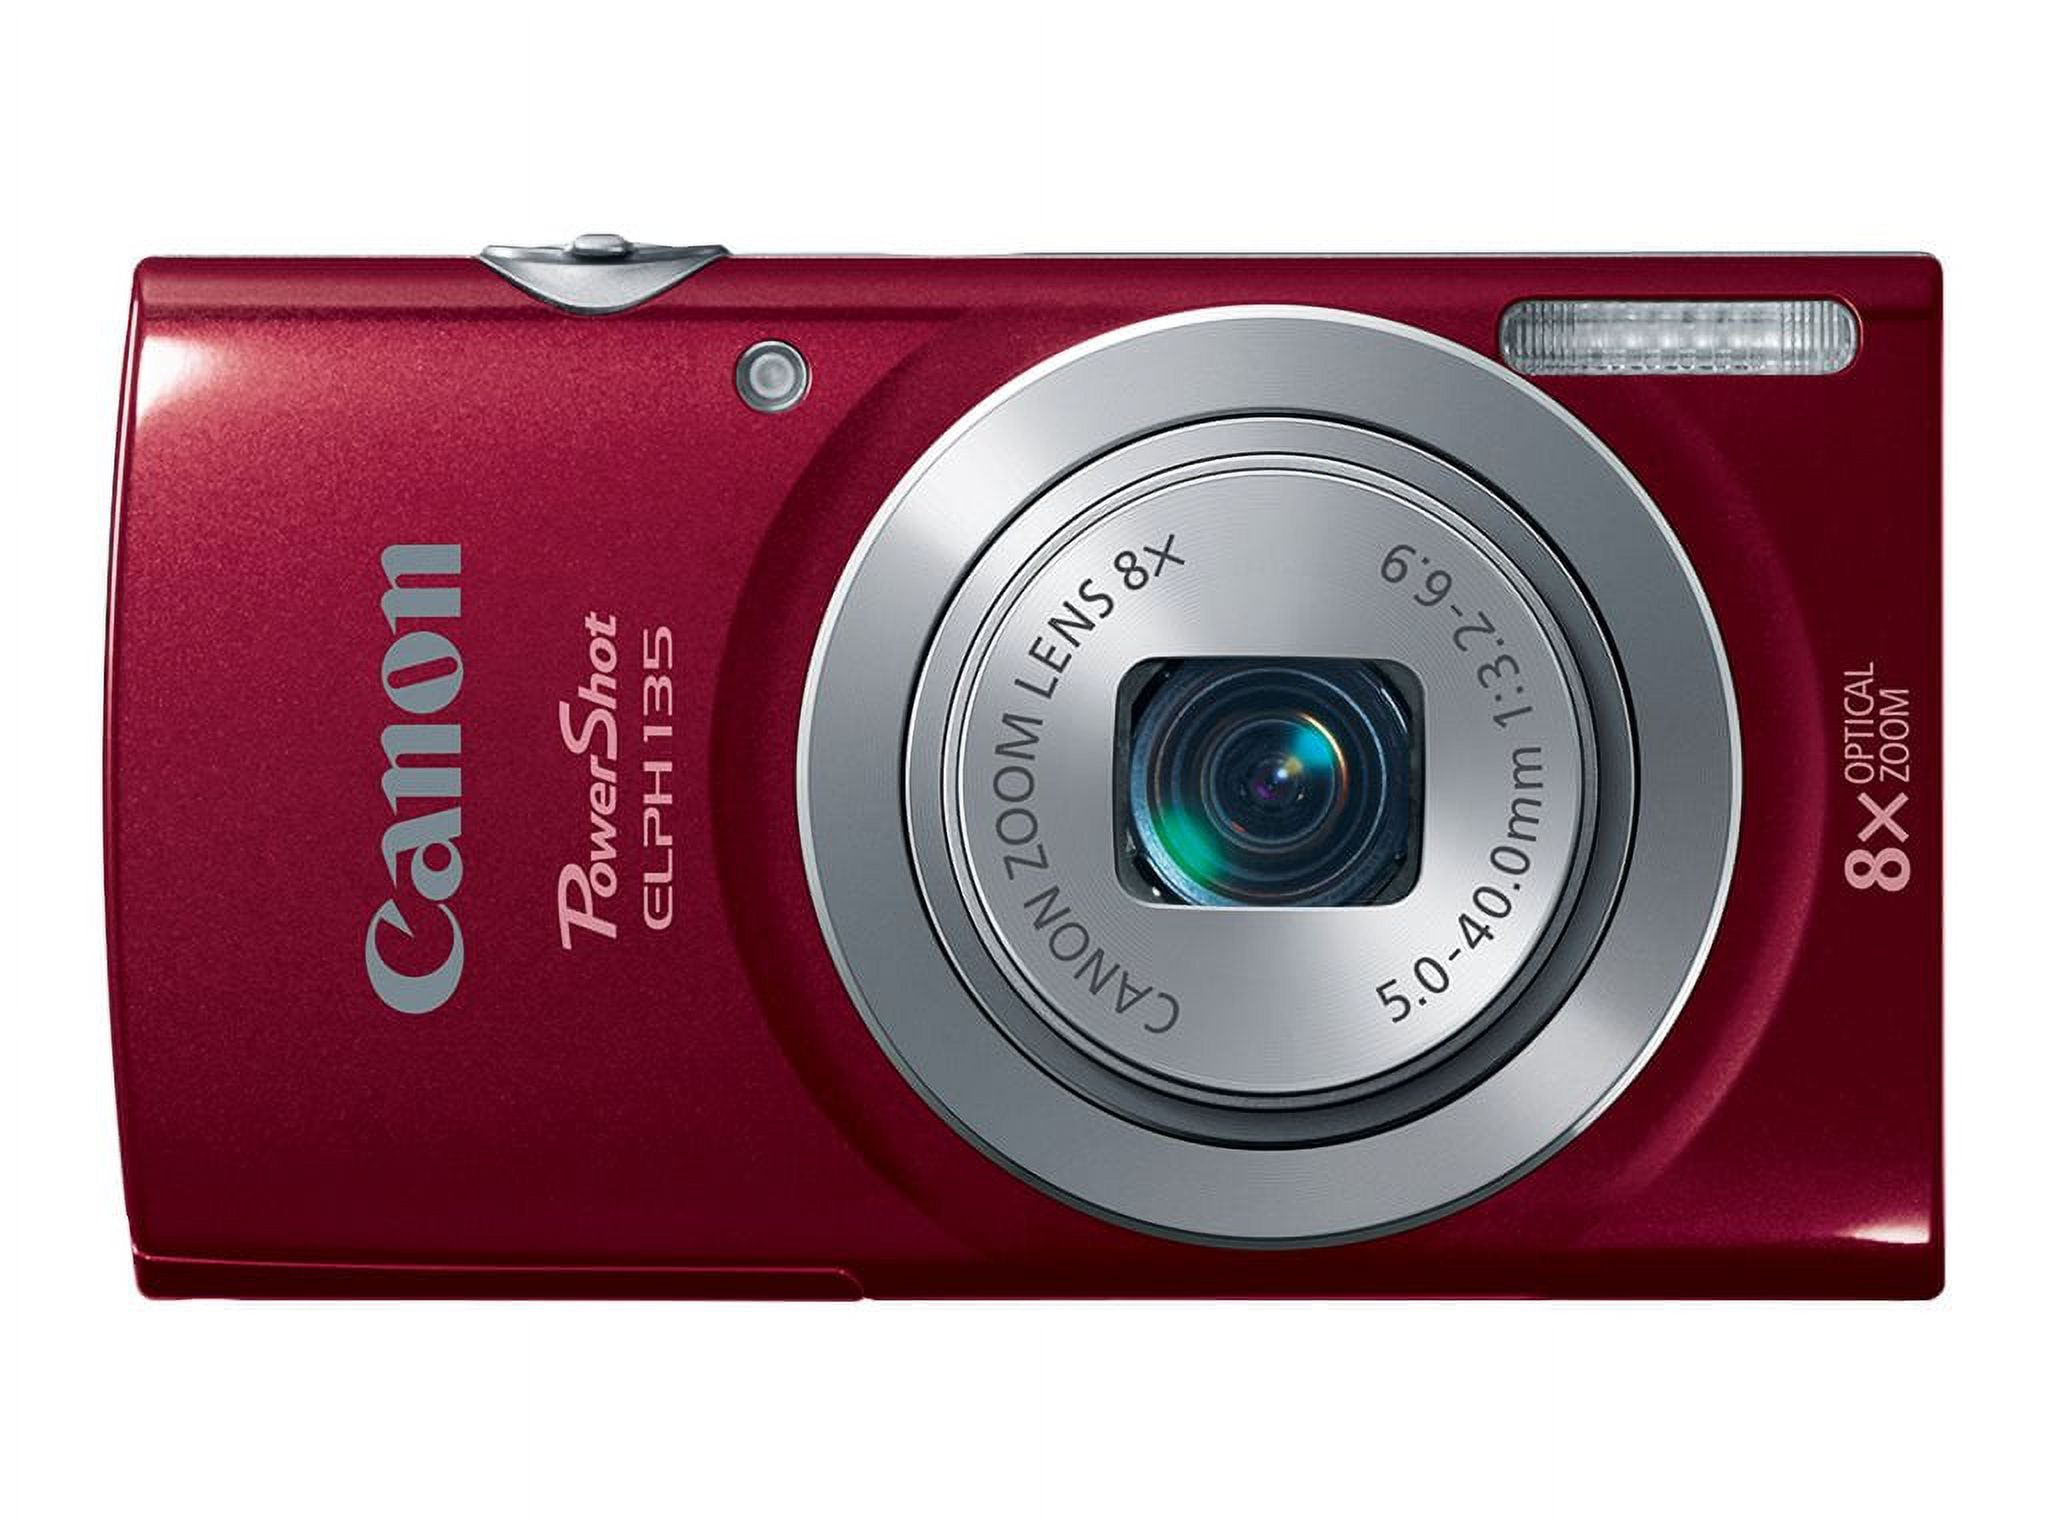 Canon PowerShot ELPH 135 - Digital camera - compact - 16.0 MP - 720p - 8x optical zoom - red - image 1 of 3